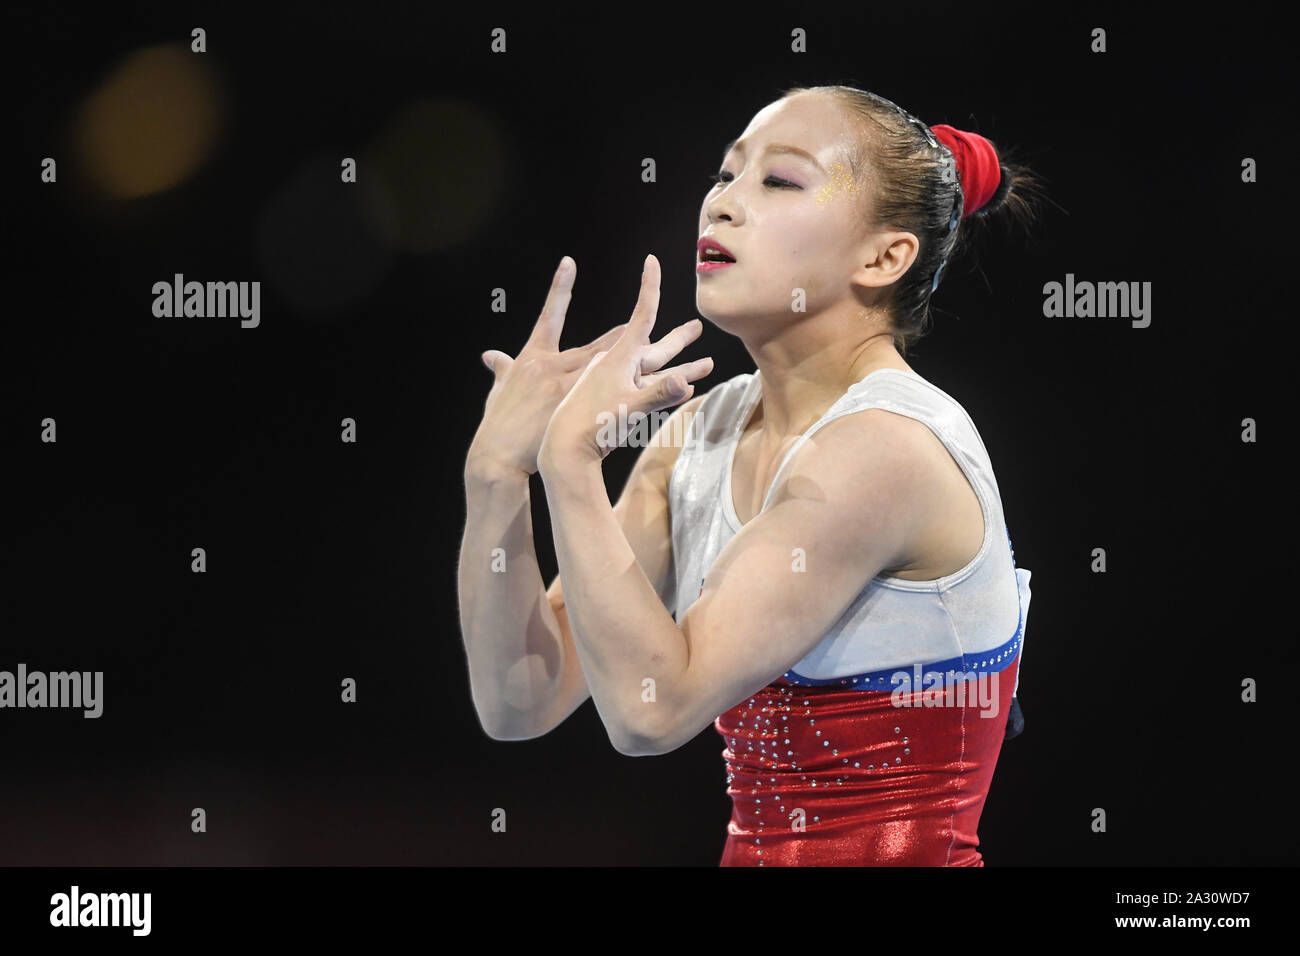 Stuttgart, Germany. 4th Oct, 2019. SU JONG KIM from North Korea performs her floor routine during the qualification round in the Hanns-Martin-Schleyer-Halle in Stuttgart, Germany. Credit: Amy Sanderson/ZUMA Wire/Alamy Live News Stock Photo